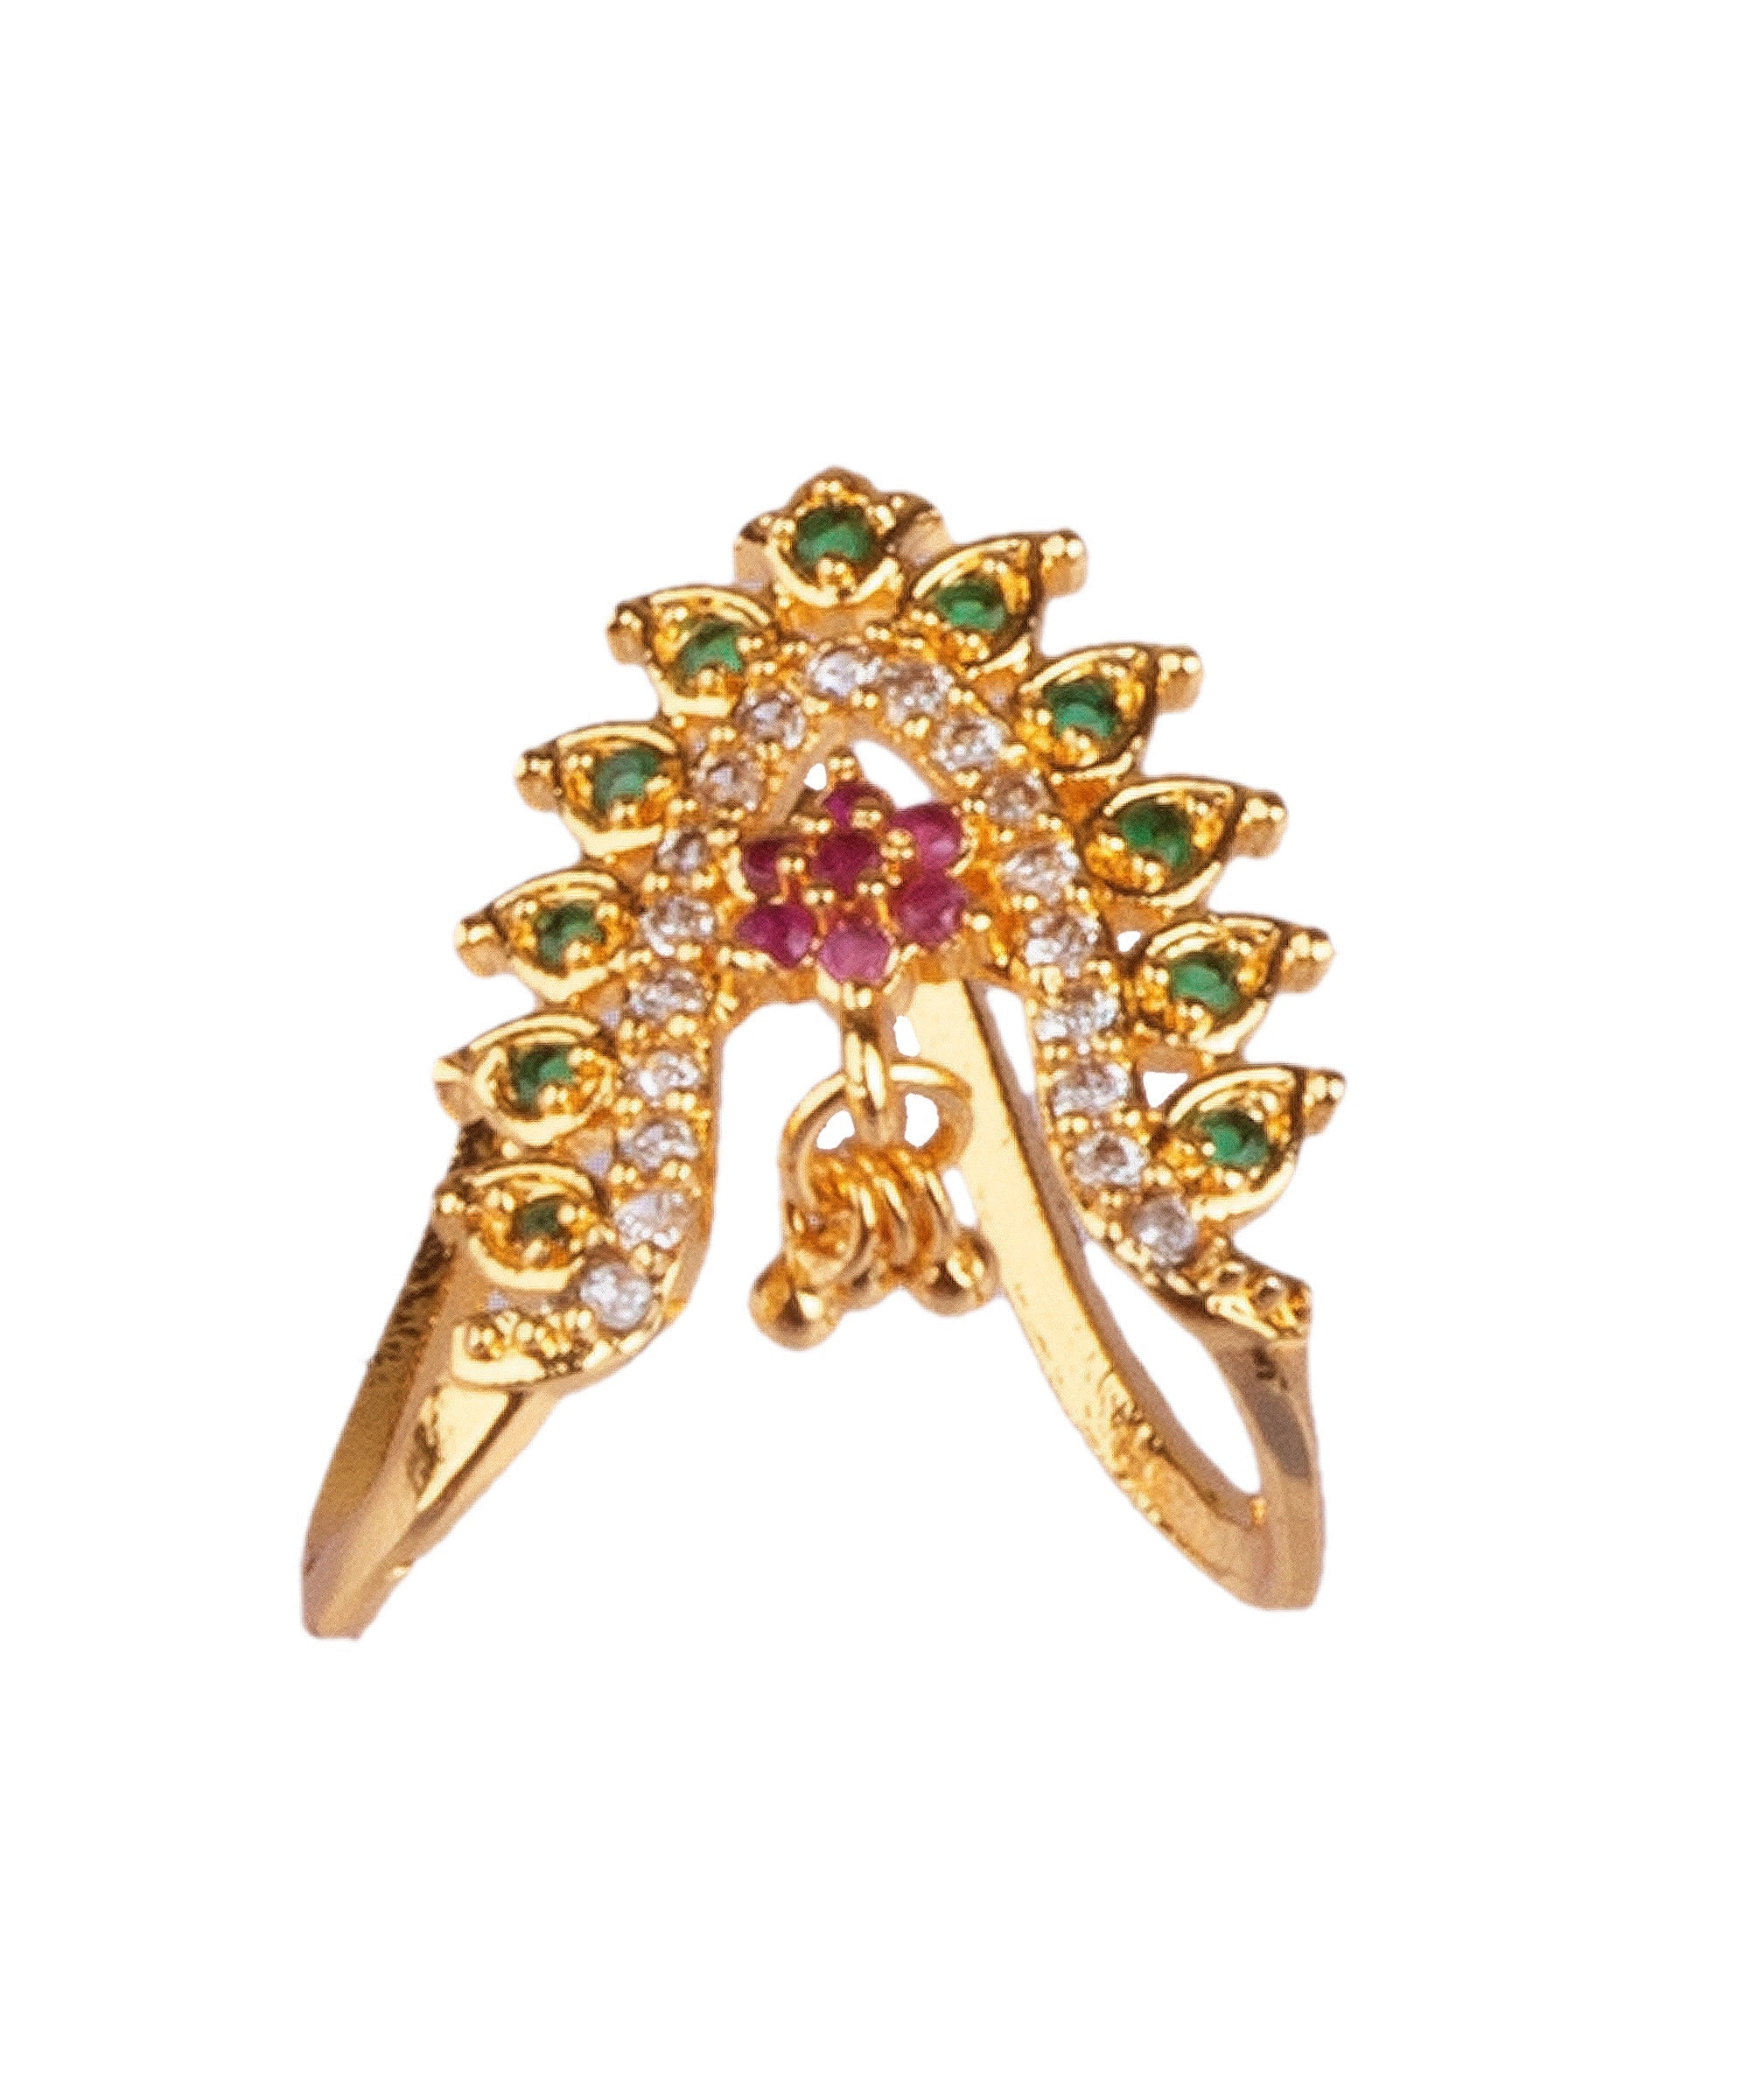 Adjustable Size Finger ring with Laxmi 16223N